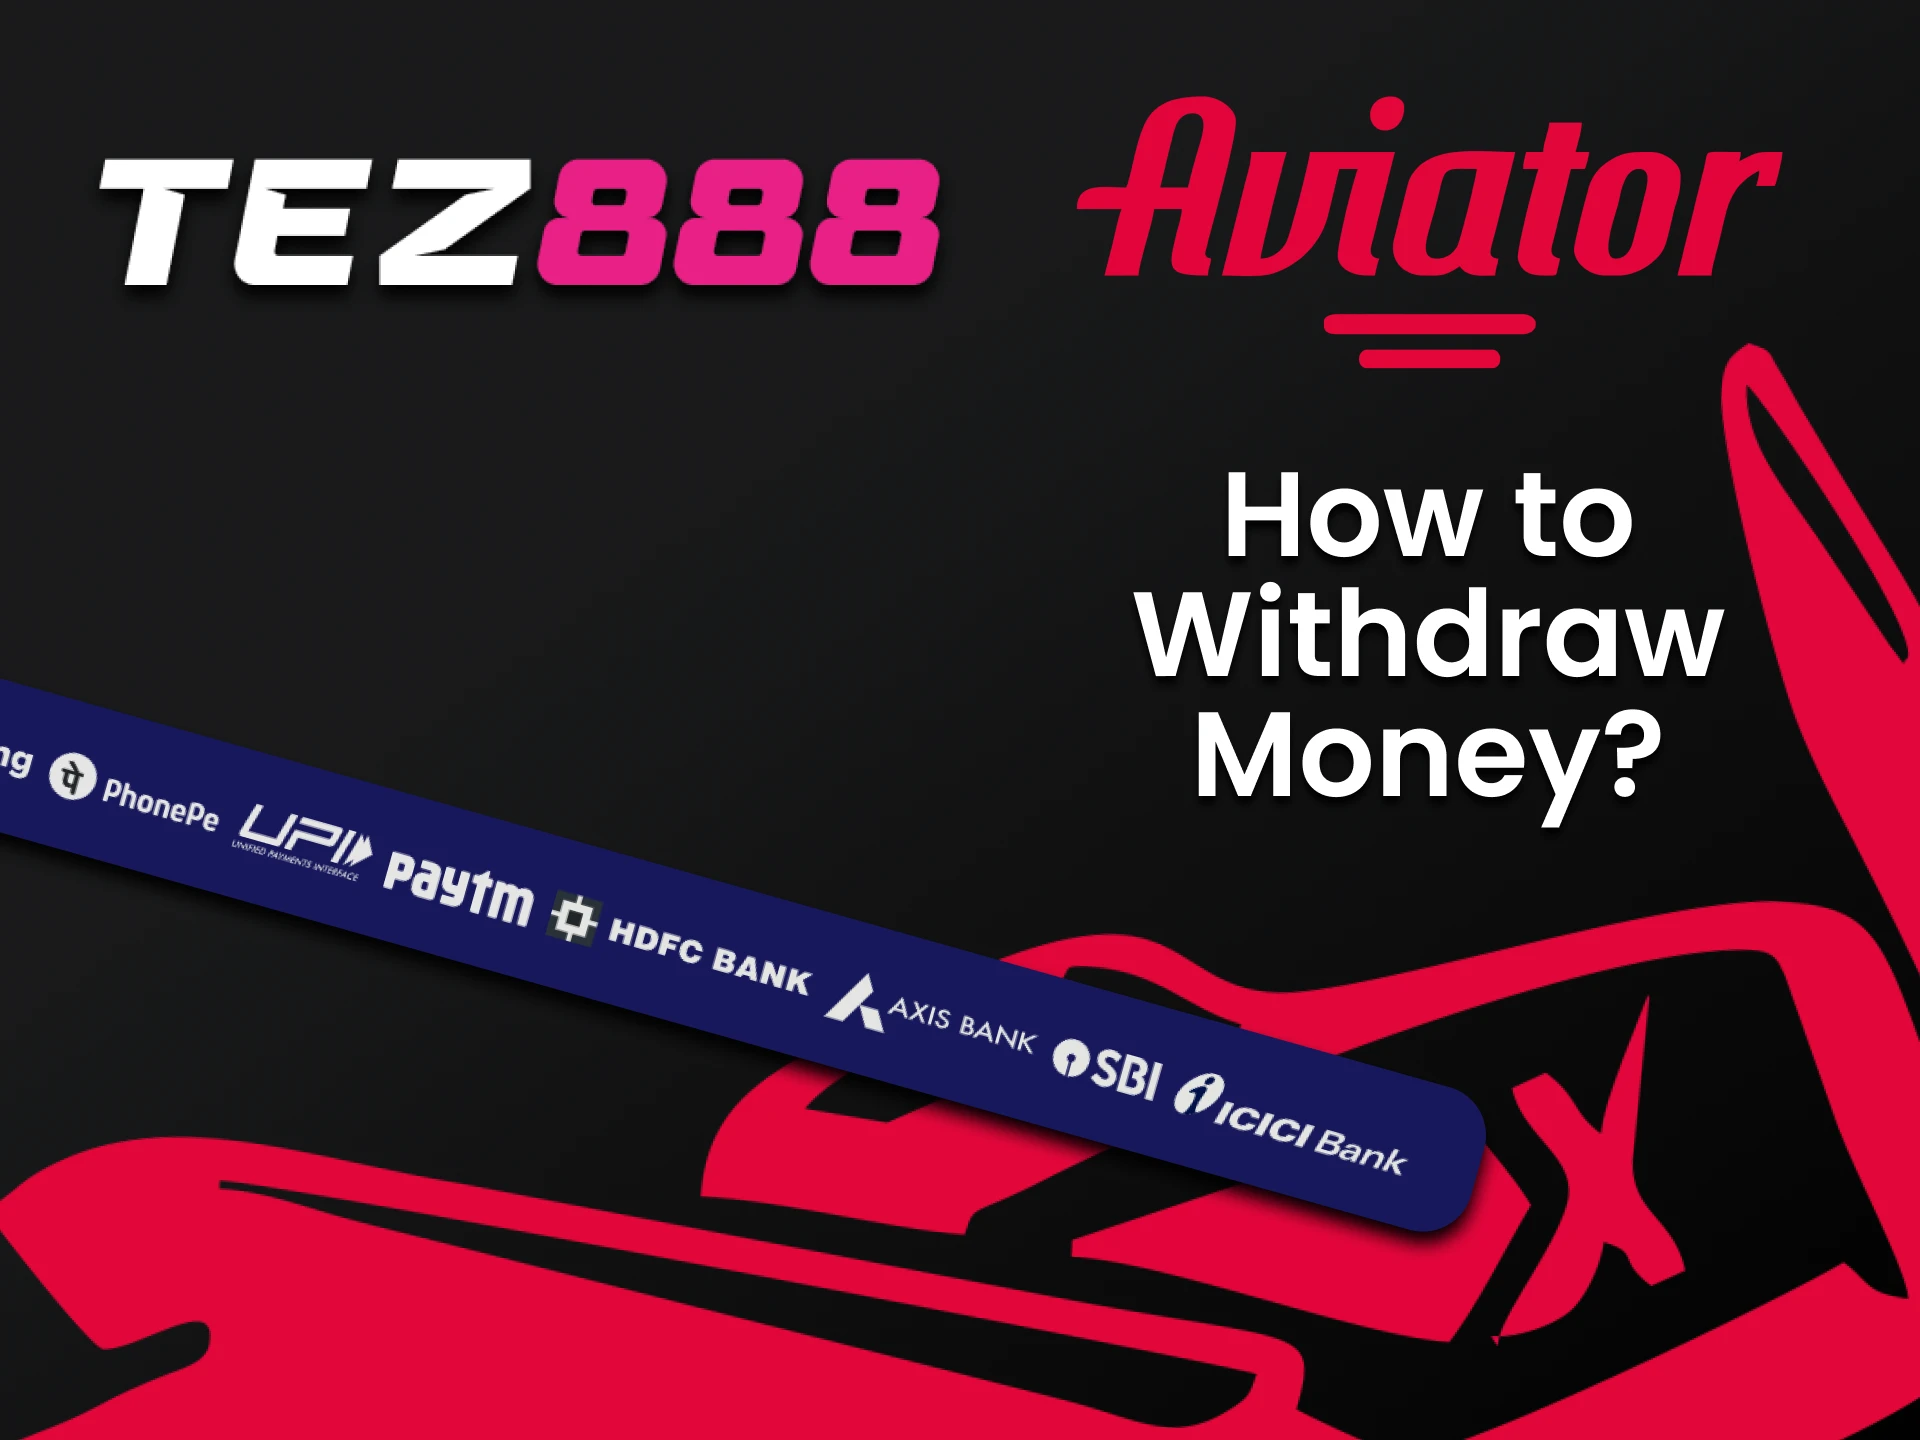 Find out how to withdraw funds for the Aviator game on Tez888.